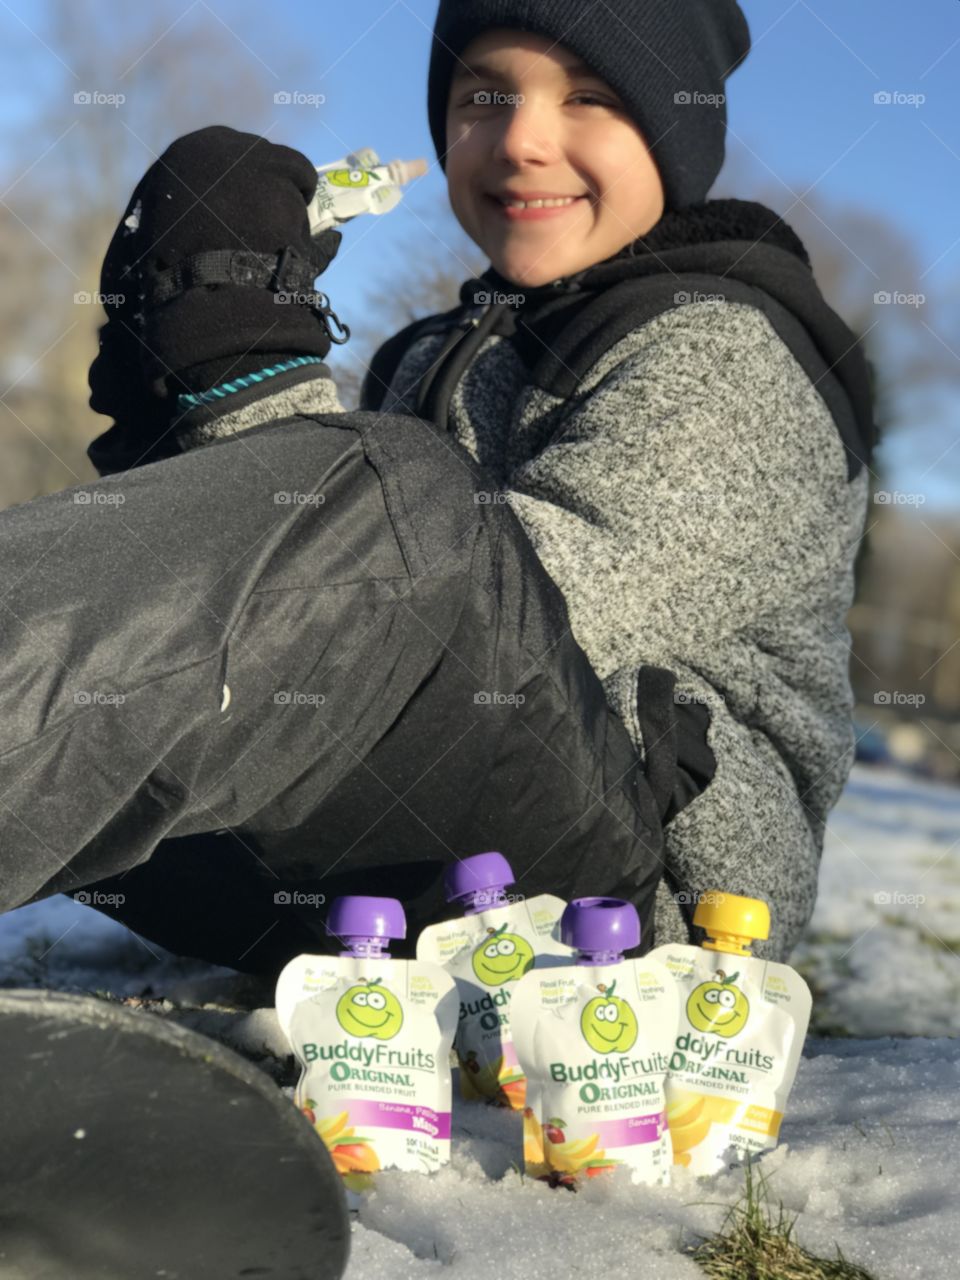 Boy and buddy fruits in the winter 